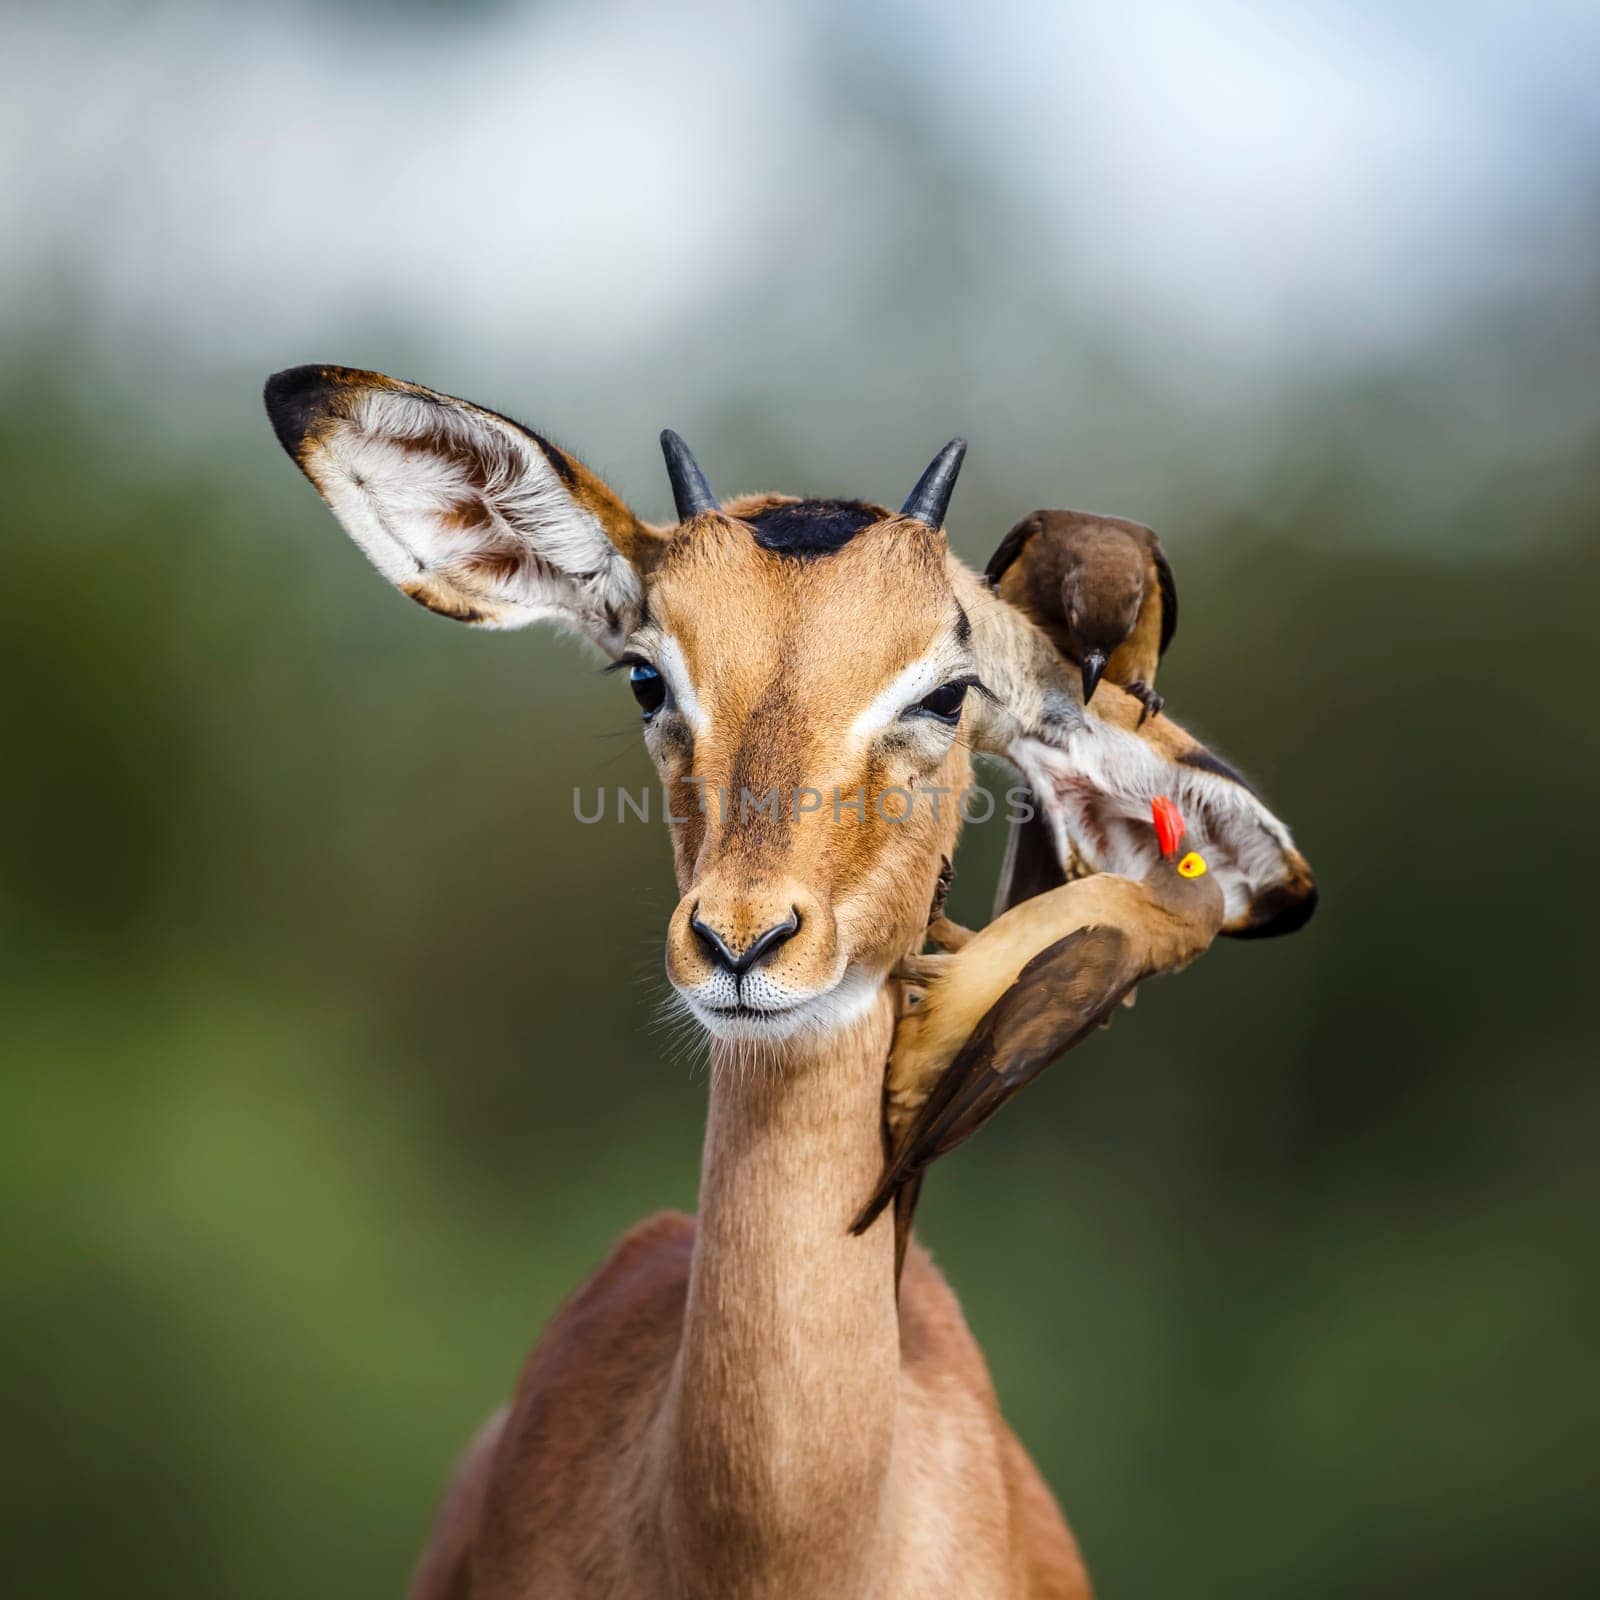 Common Impala portrait with Red billed Oxpecker in Kruger National park, South Africa ; Specie Aepyceros melampus family of Bovidae  and Specie Buphagus erythrorhynchus family of Buphagidae